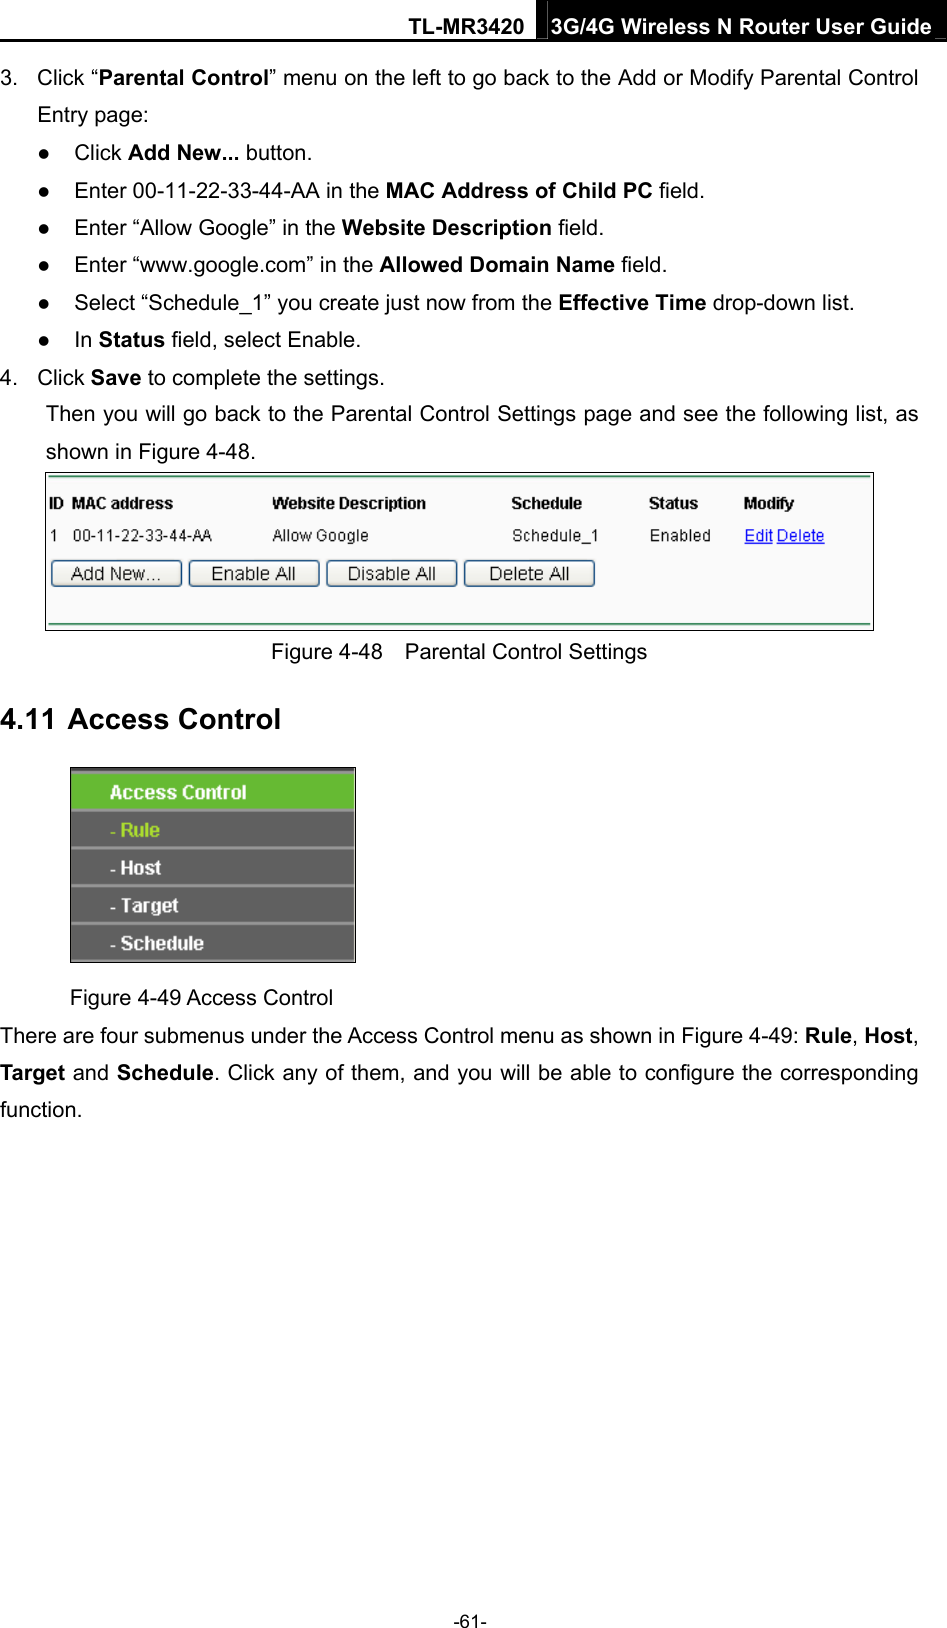 TL-MR3420 3G/4G Wireless N Router User Guide 3. Click “Parental Control” menu on the left to go back to the Add or Modify Parental Control Entry page:    Click Add New... button.    Enter 00-11-22-33-44-AA in the MAC Address of Child PC field.    Enter “Allow Google” in the Website Description field.    Enter “www.google.com” in the Allowed Domain Name field.    Select “Schedule_1” you create just now from the Effective Time drop-down list.    In Status field, select Enable.   4. Click Save to complete the settings. Then you will go back to the Parental Control Settings page and see the following list, as shown in Figure 4-48.  Figure 4-48    Parental Control Settings 4.11 Access Control  Figure 4-49 Access Control There are four submenus under the Access Control menu as shown in Figure 4-49: Rule, Host, Target and Schedule. Click any of them, and you will be able to configure the corresponding function. -61- 